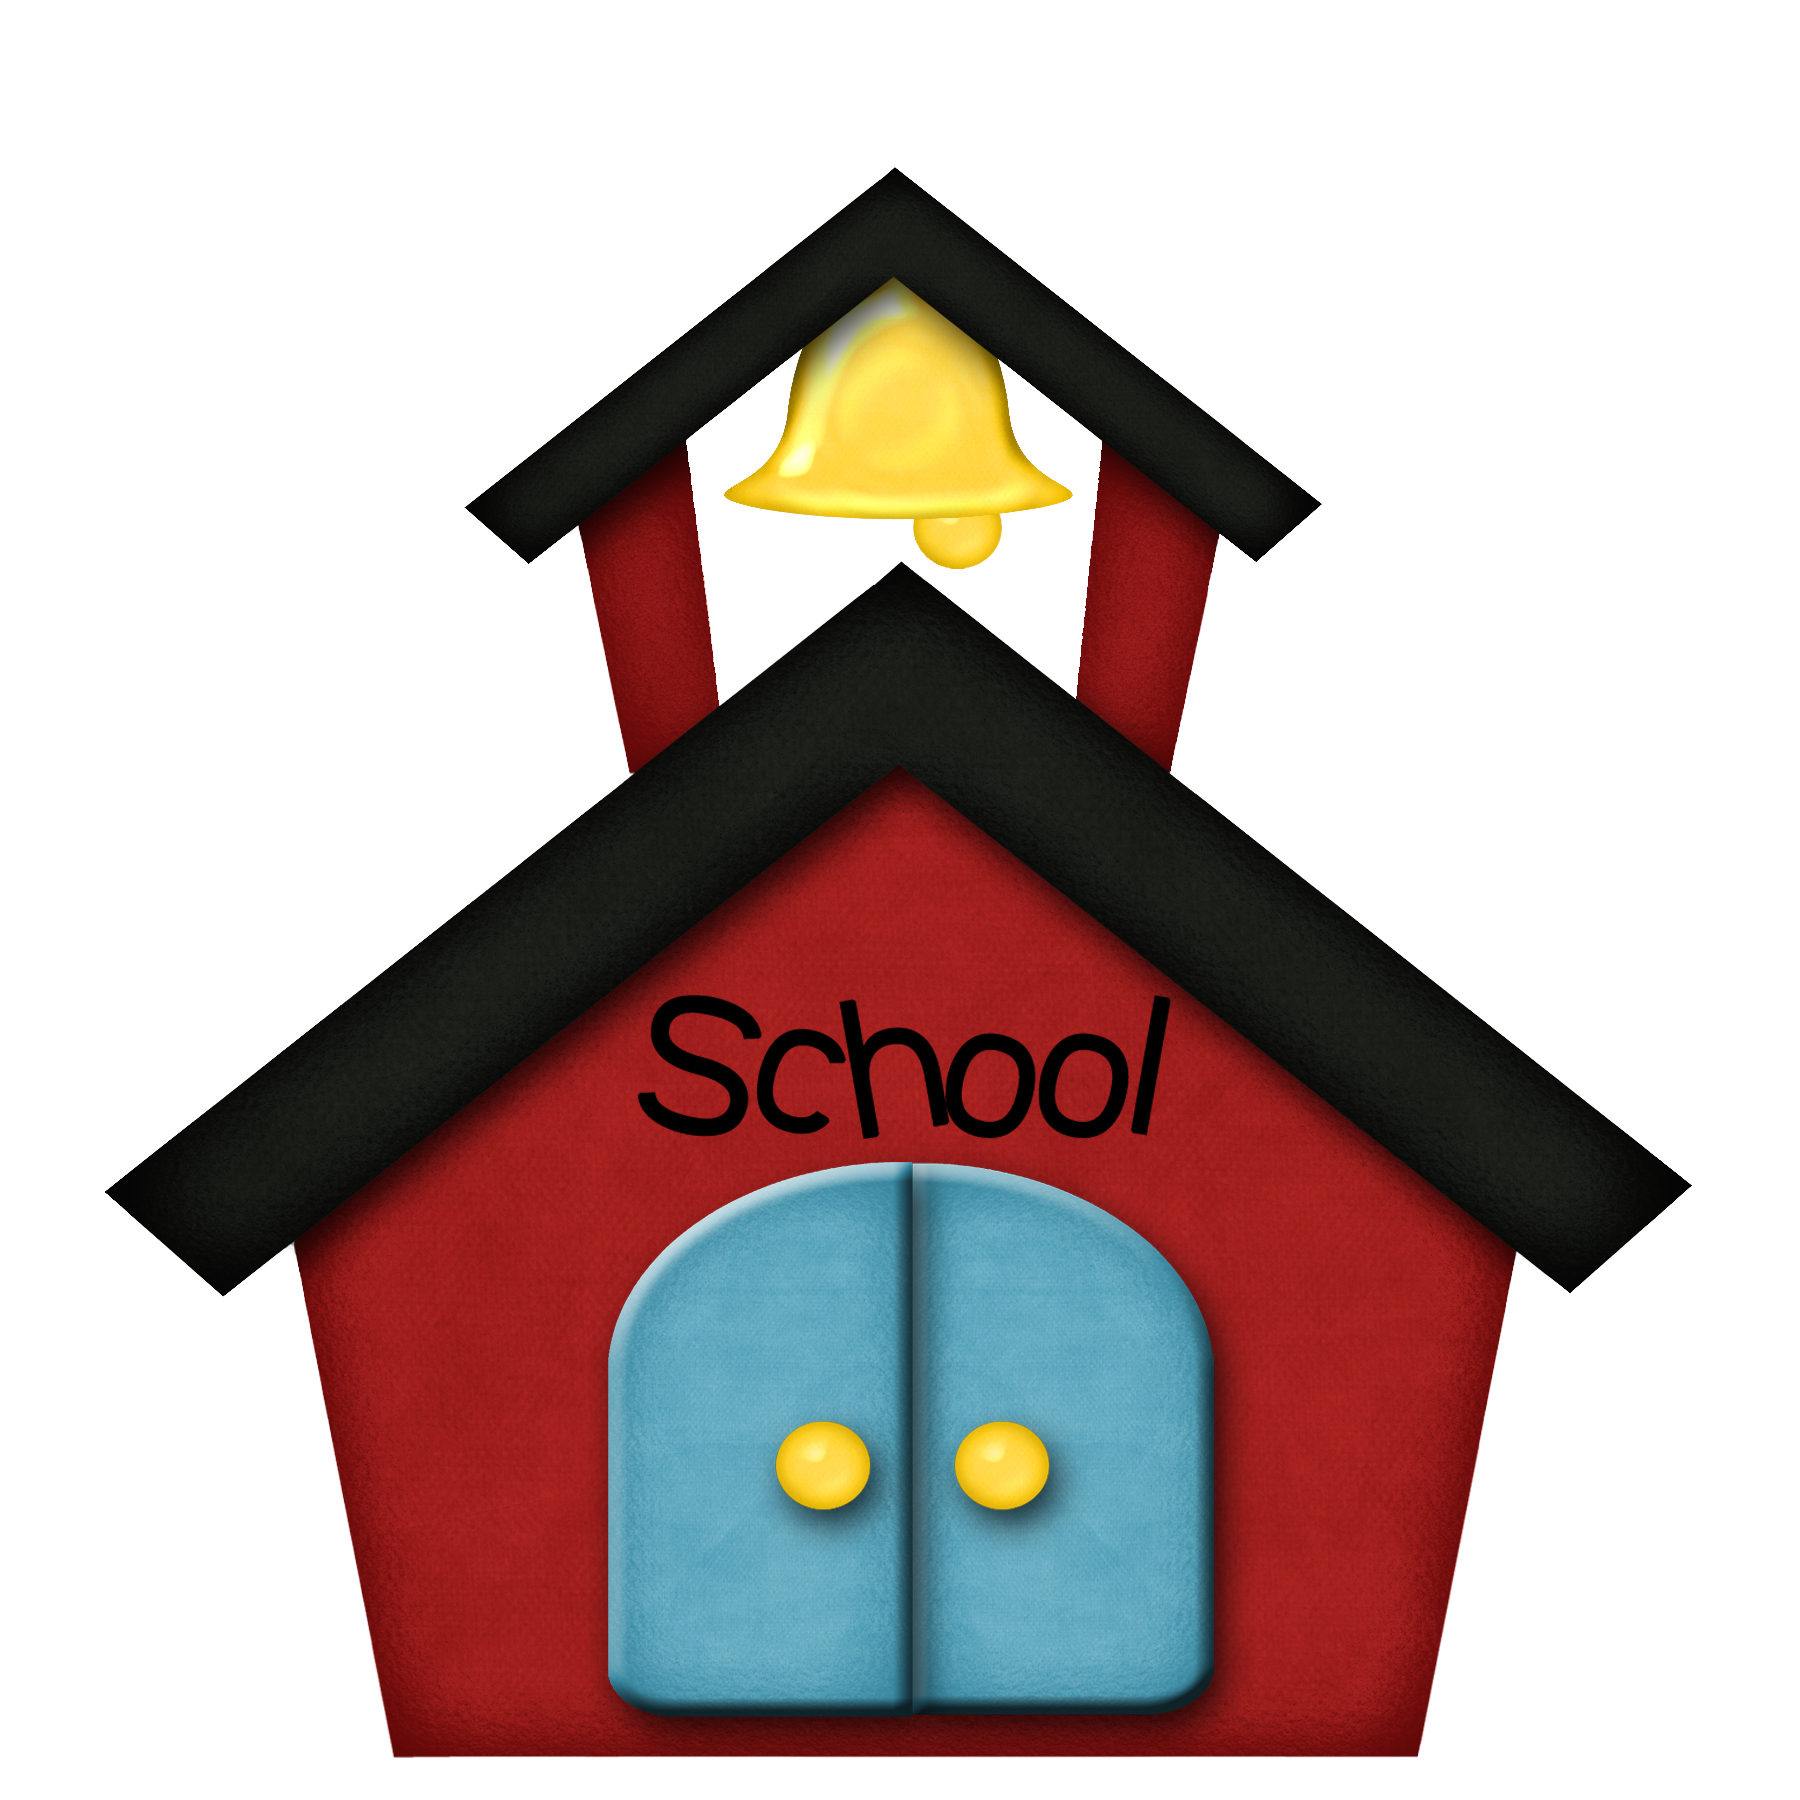 School Building Clipart Free | Clipart Panda - Free Clipart Images